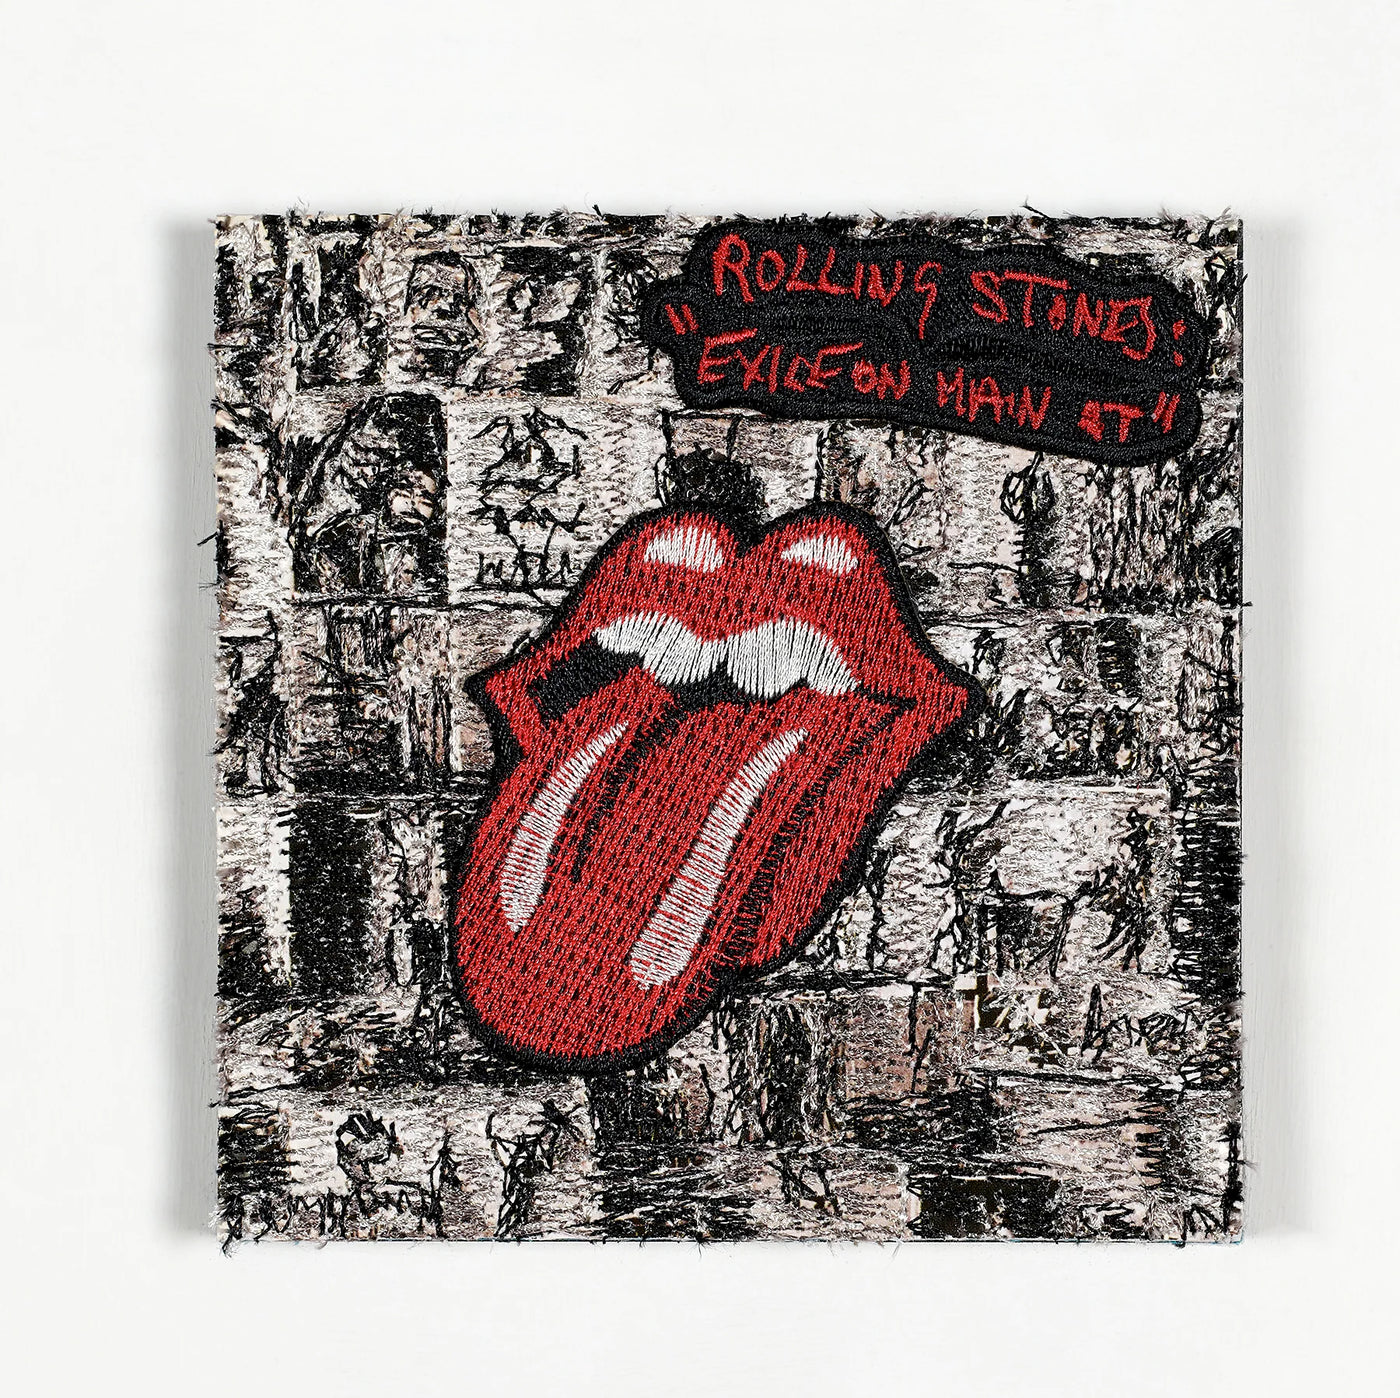 Exile On Mainstreet - Rolling Stones